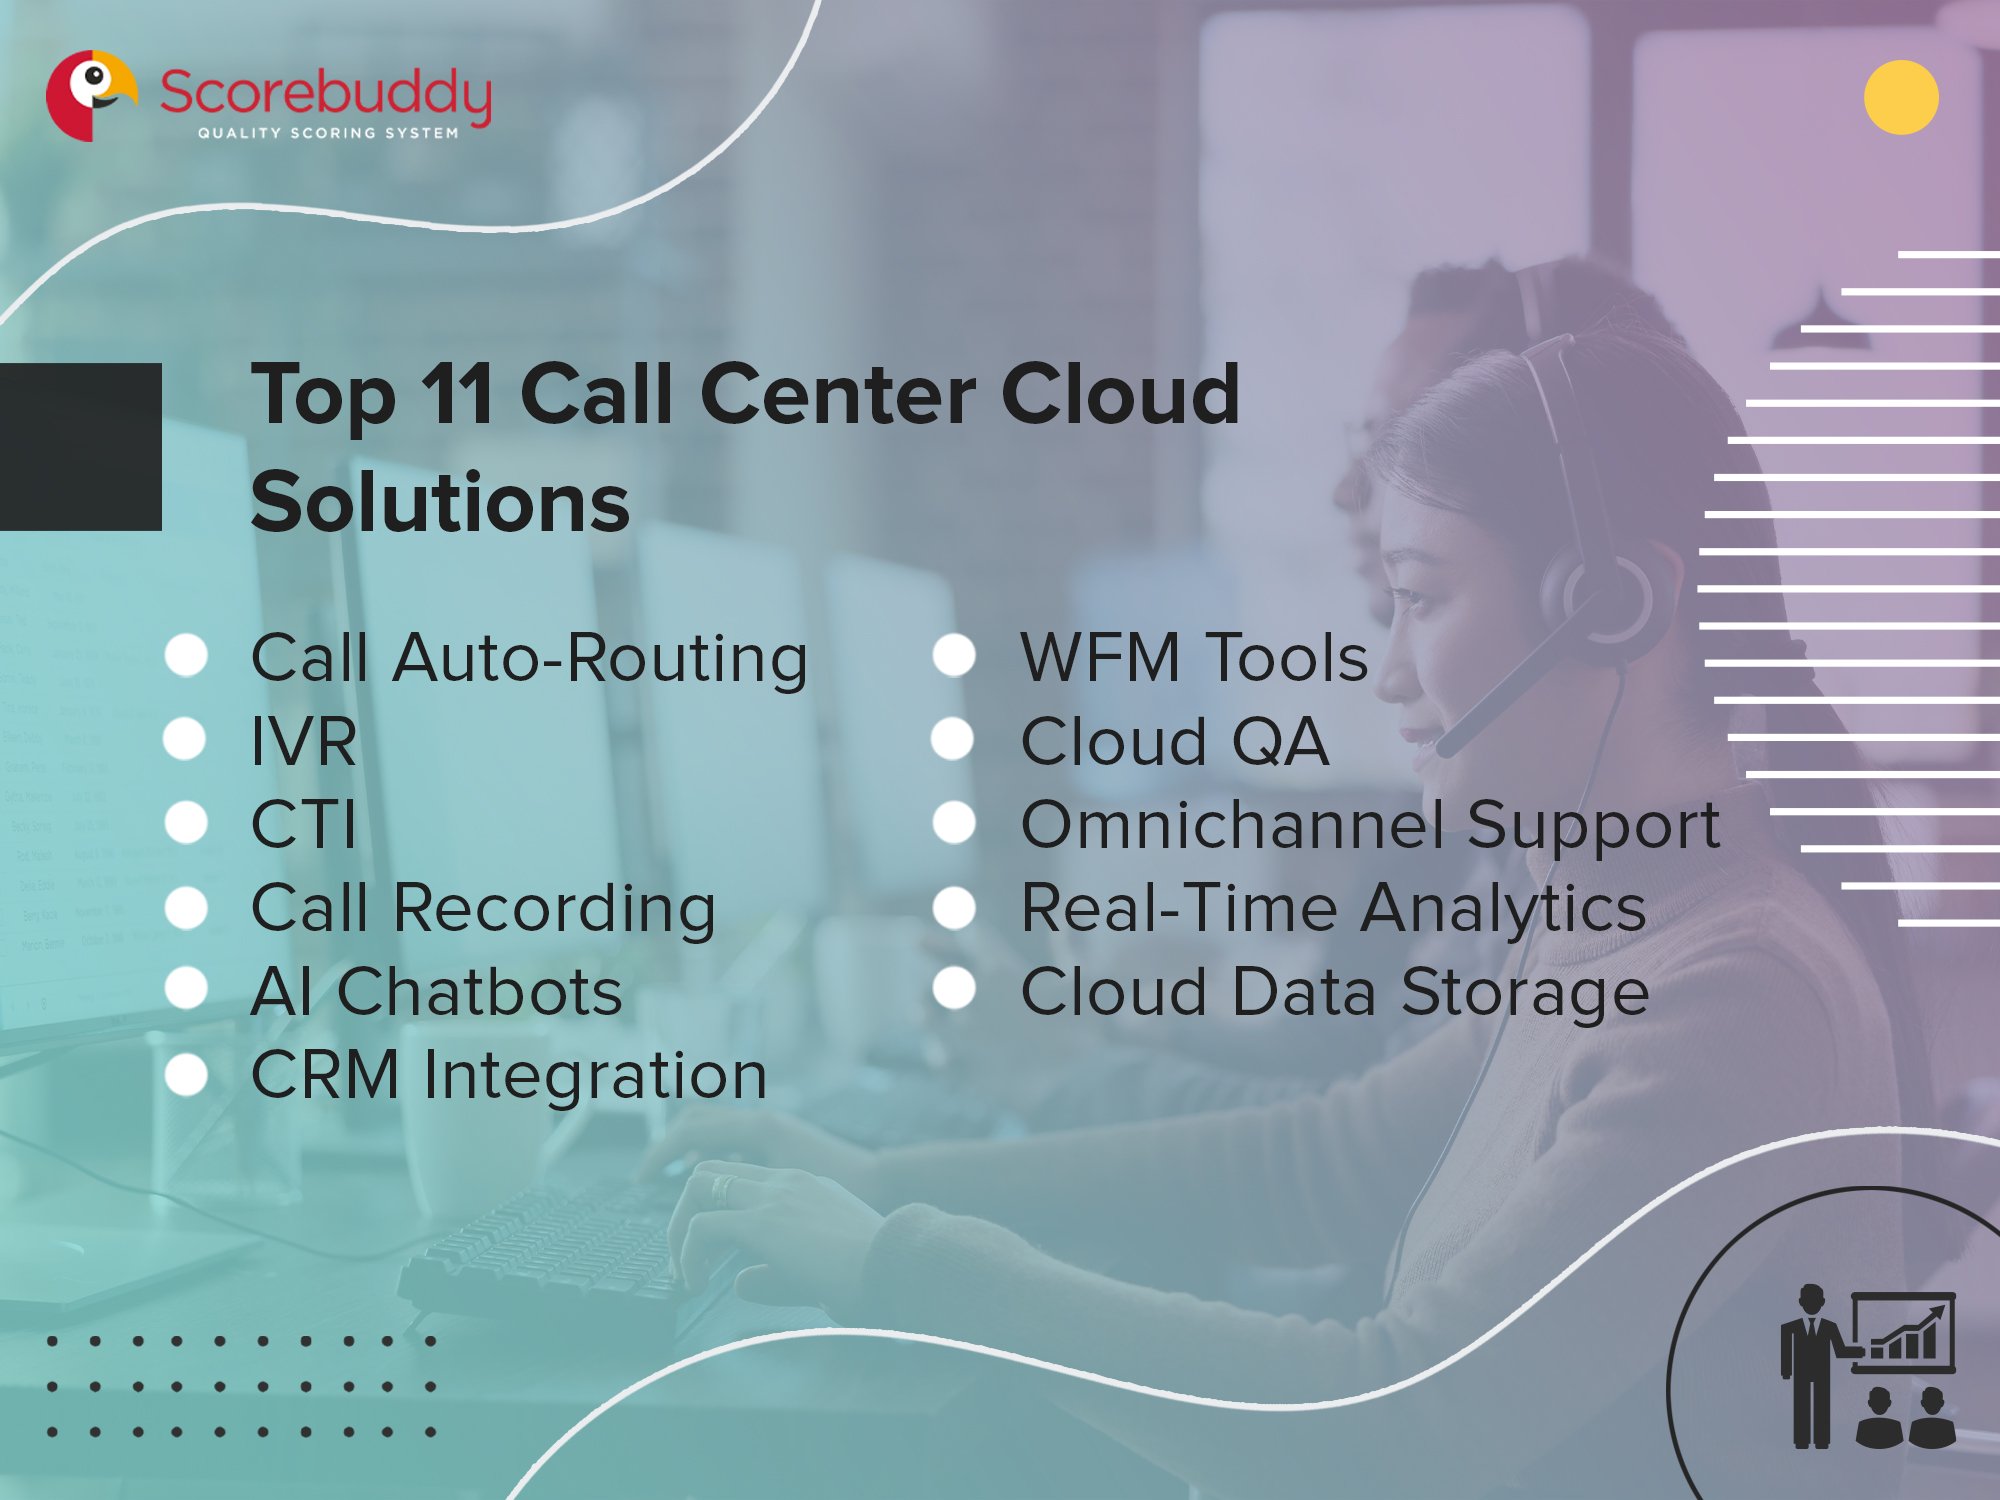 Top 11 Call Center Cloud Solutions - 2